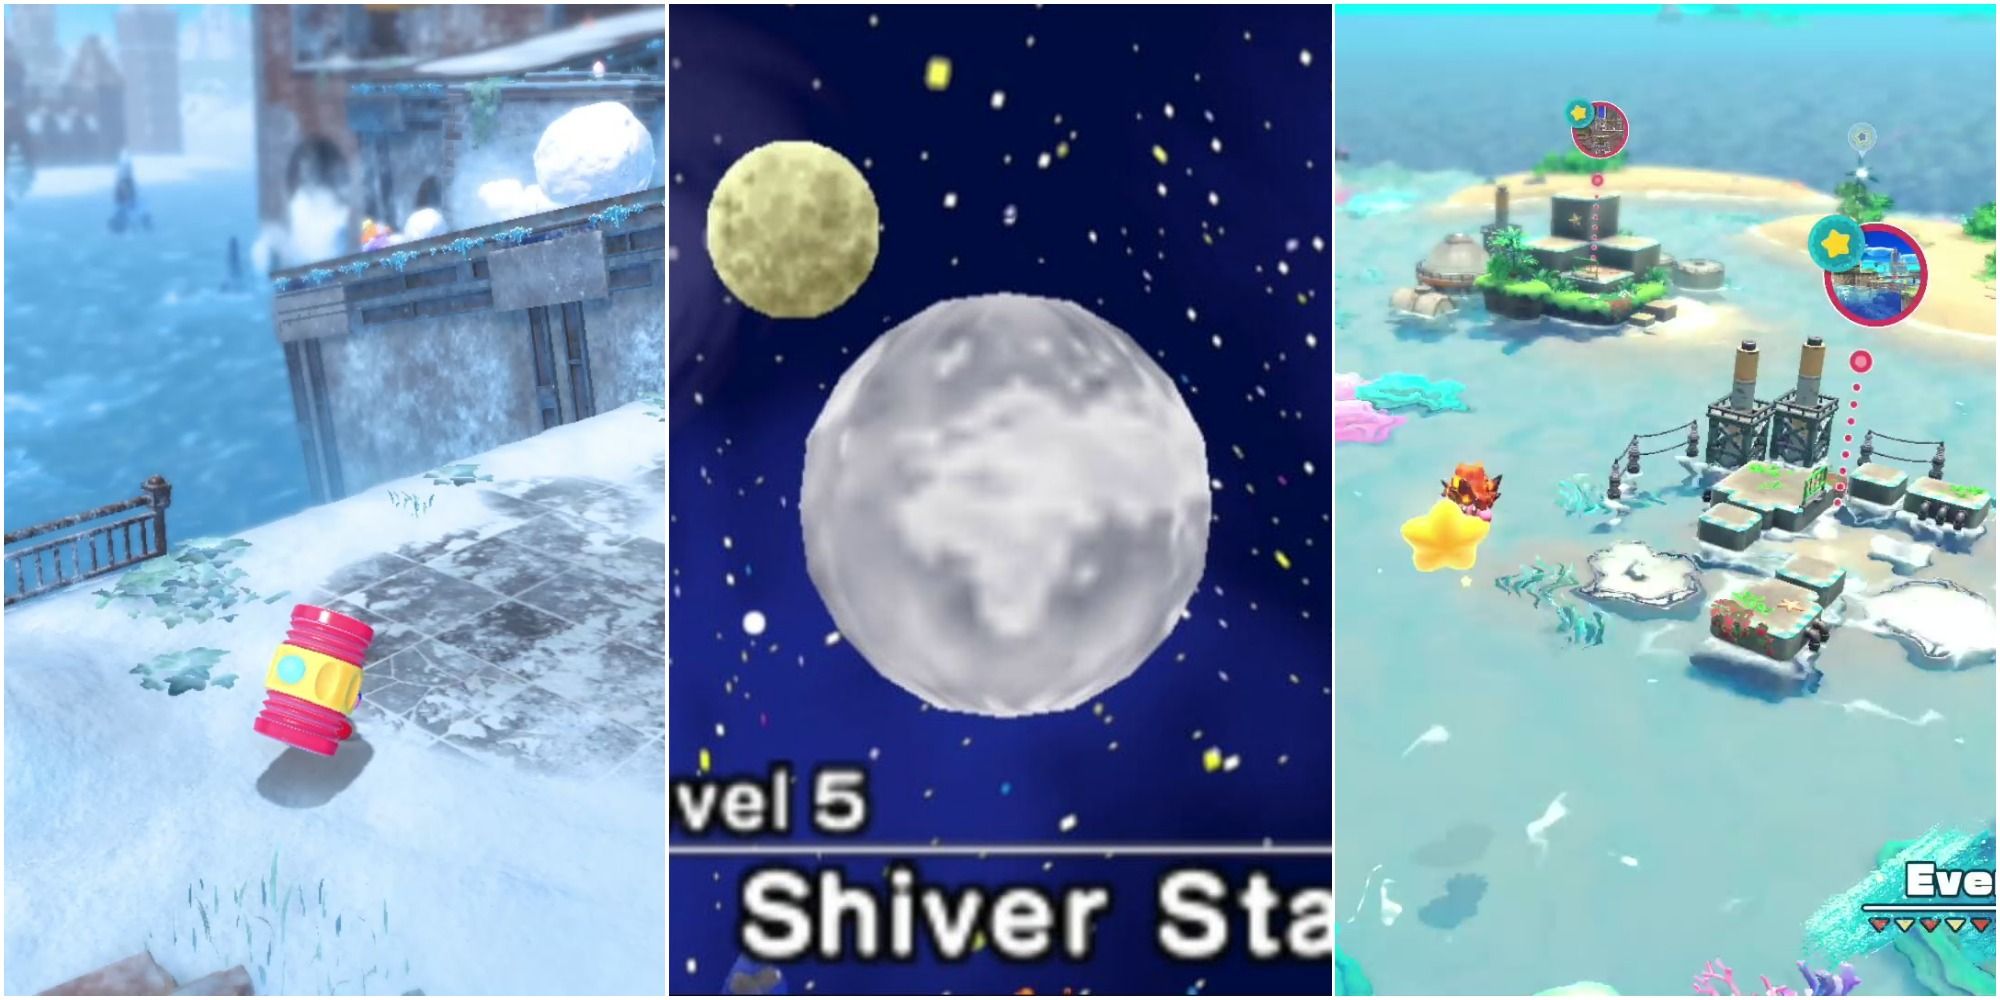 A split image from left to right: Kirby in Winter Horns, Shiver Star from Kirby 64 The Crystal Shards, Kirby on warp star above Everbay Coast